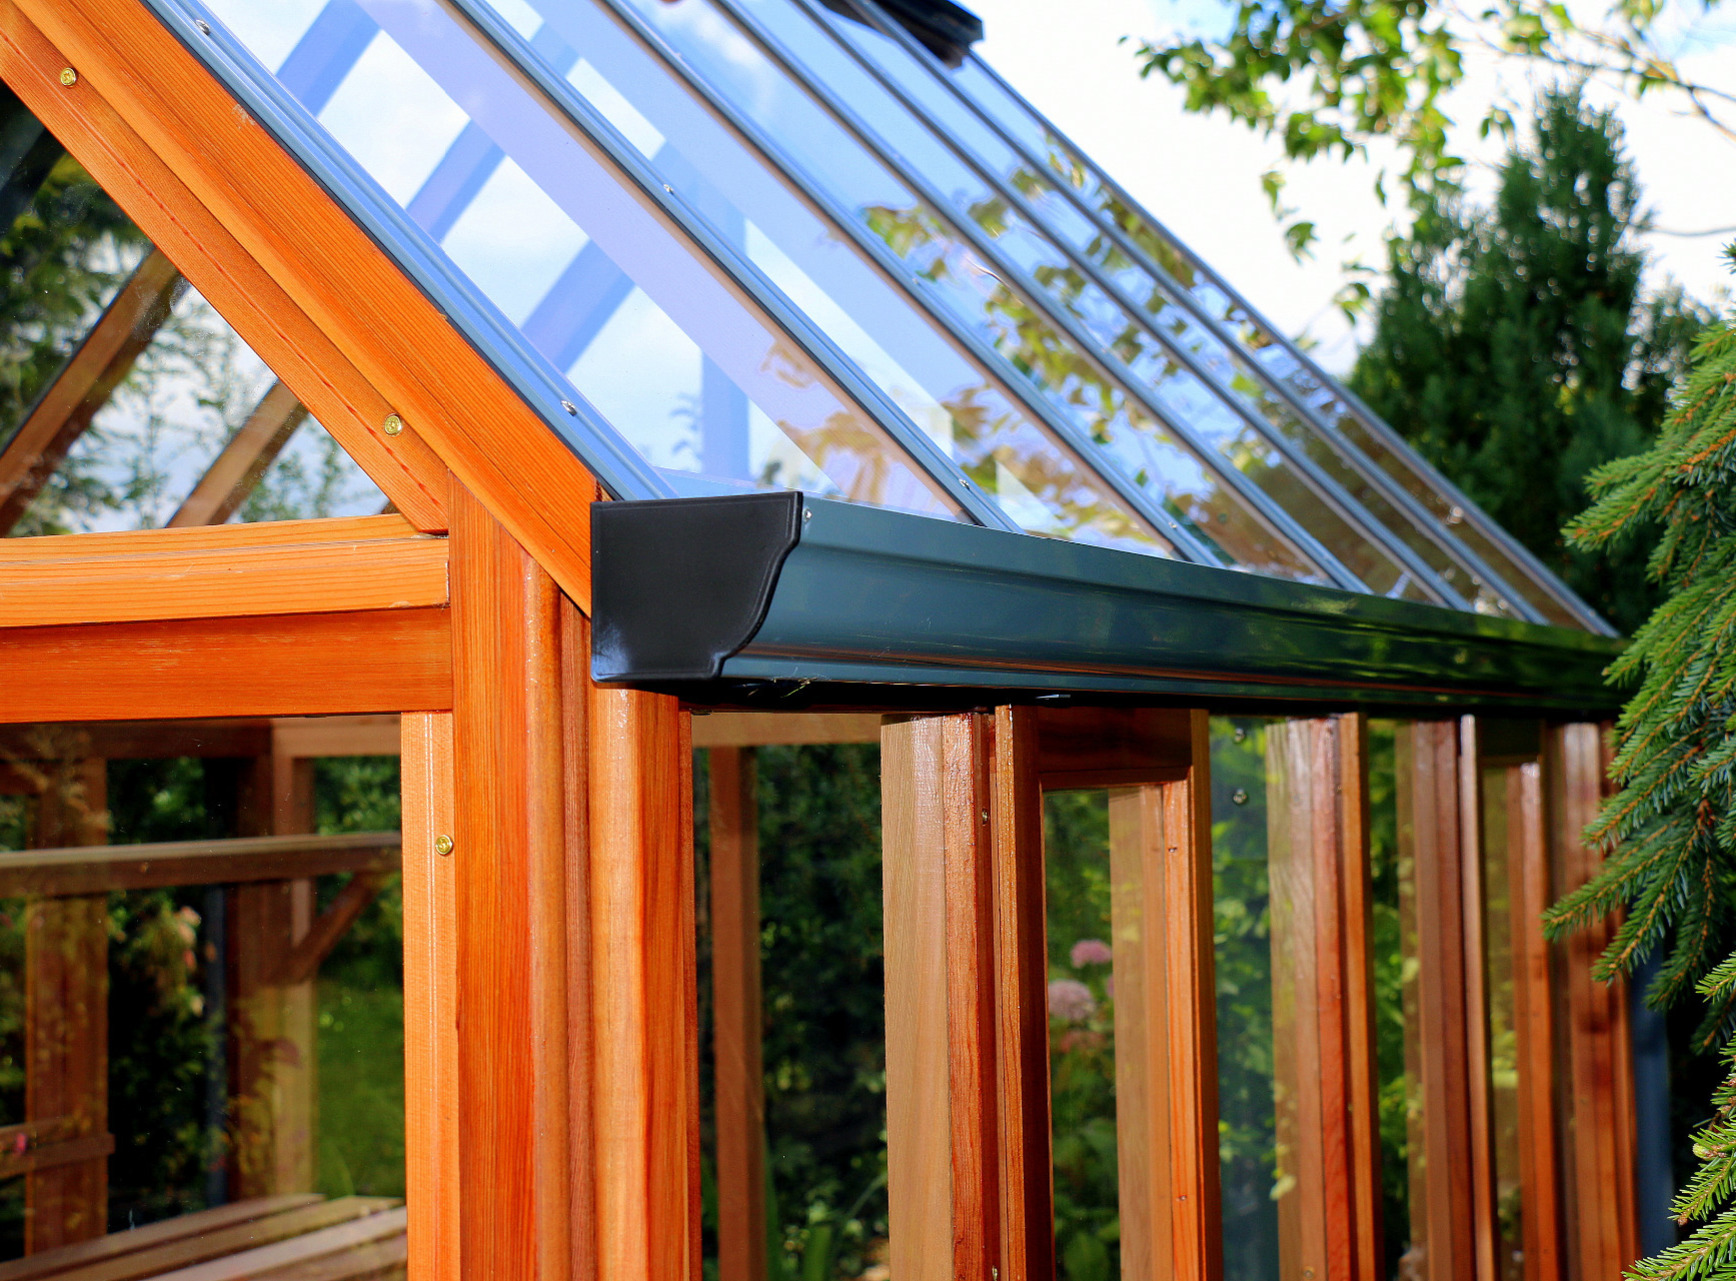 RHS Rosemoor Greenhouse with cedar base panels - traditional Victorian timber Greenhouse